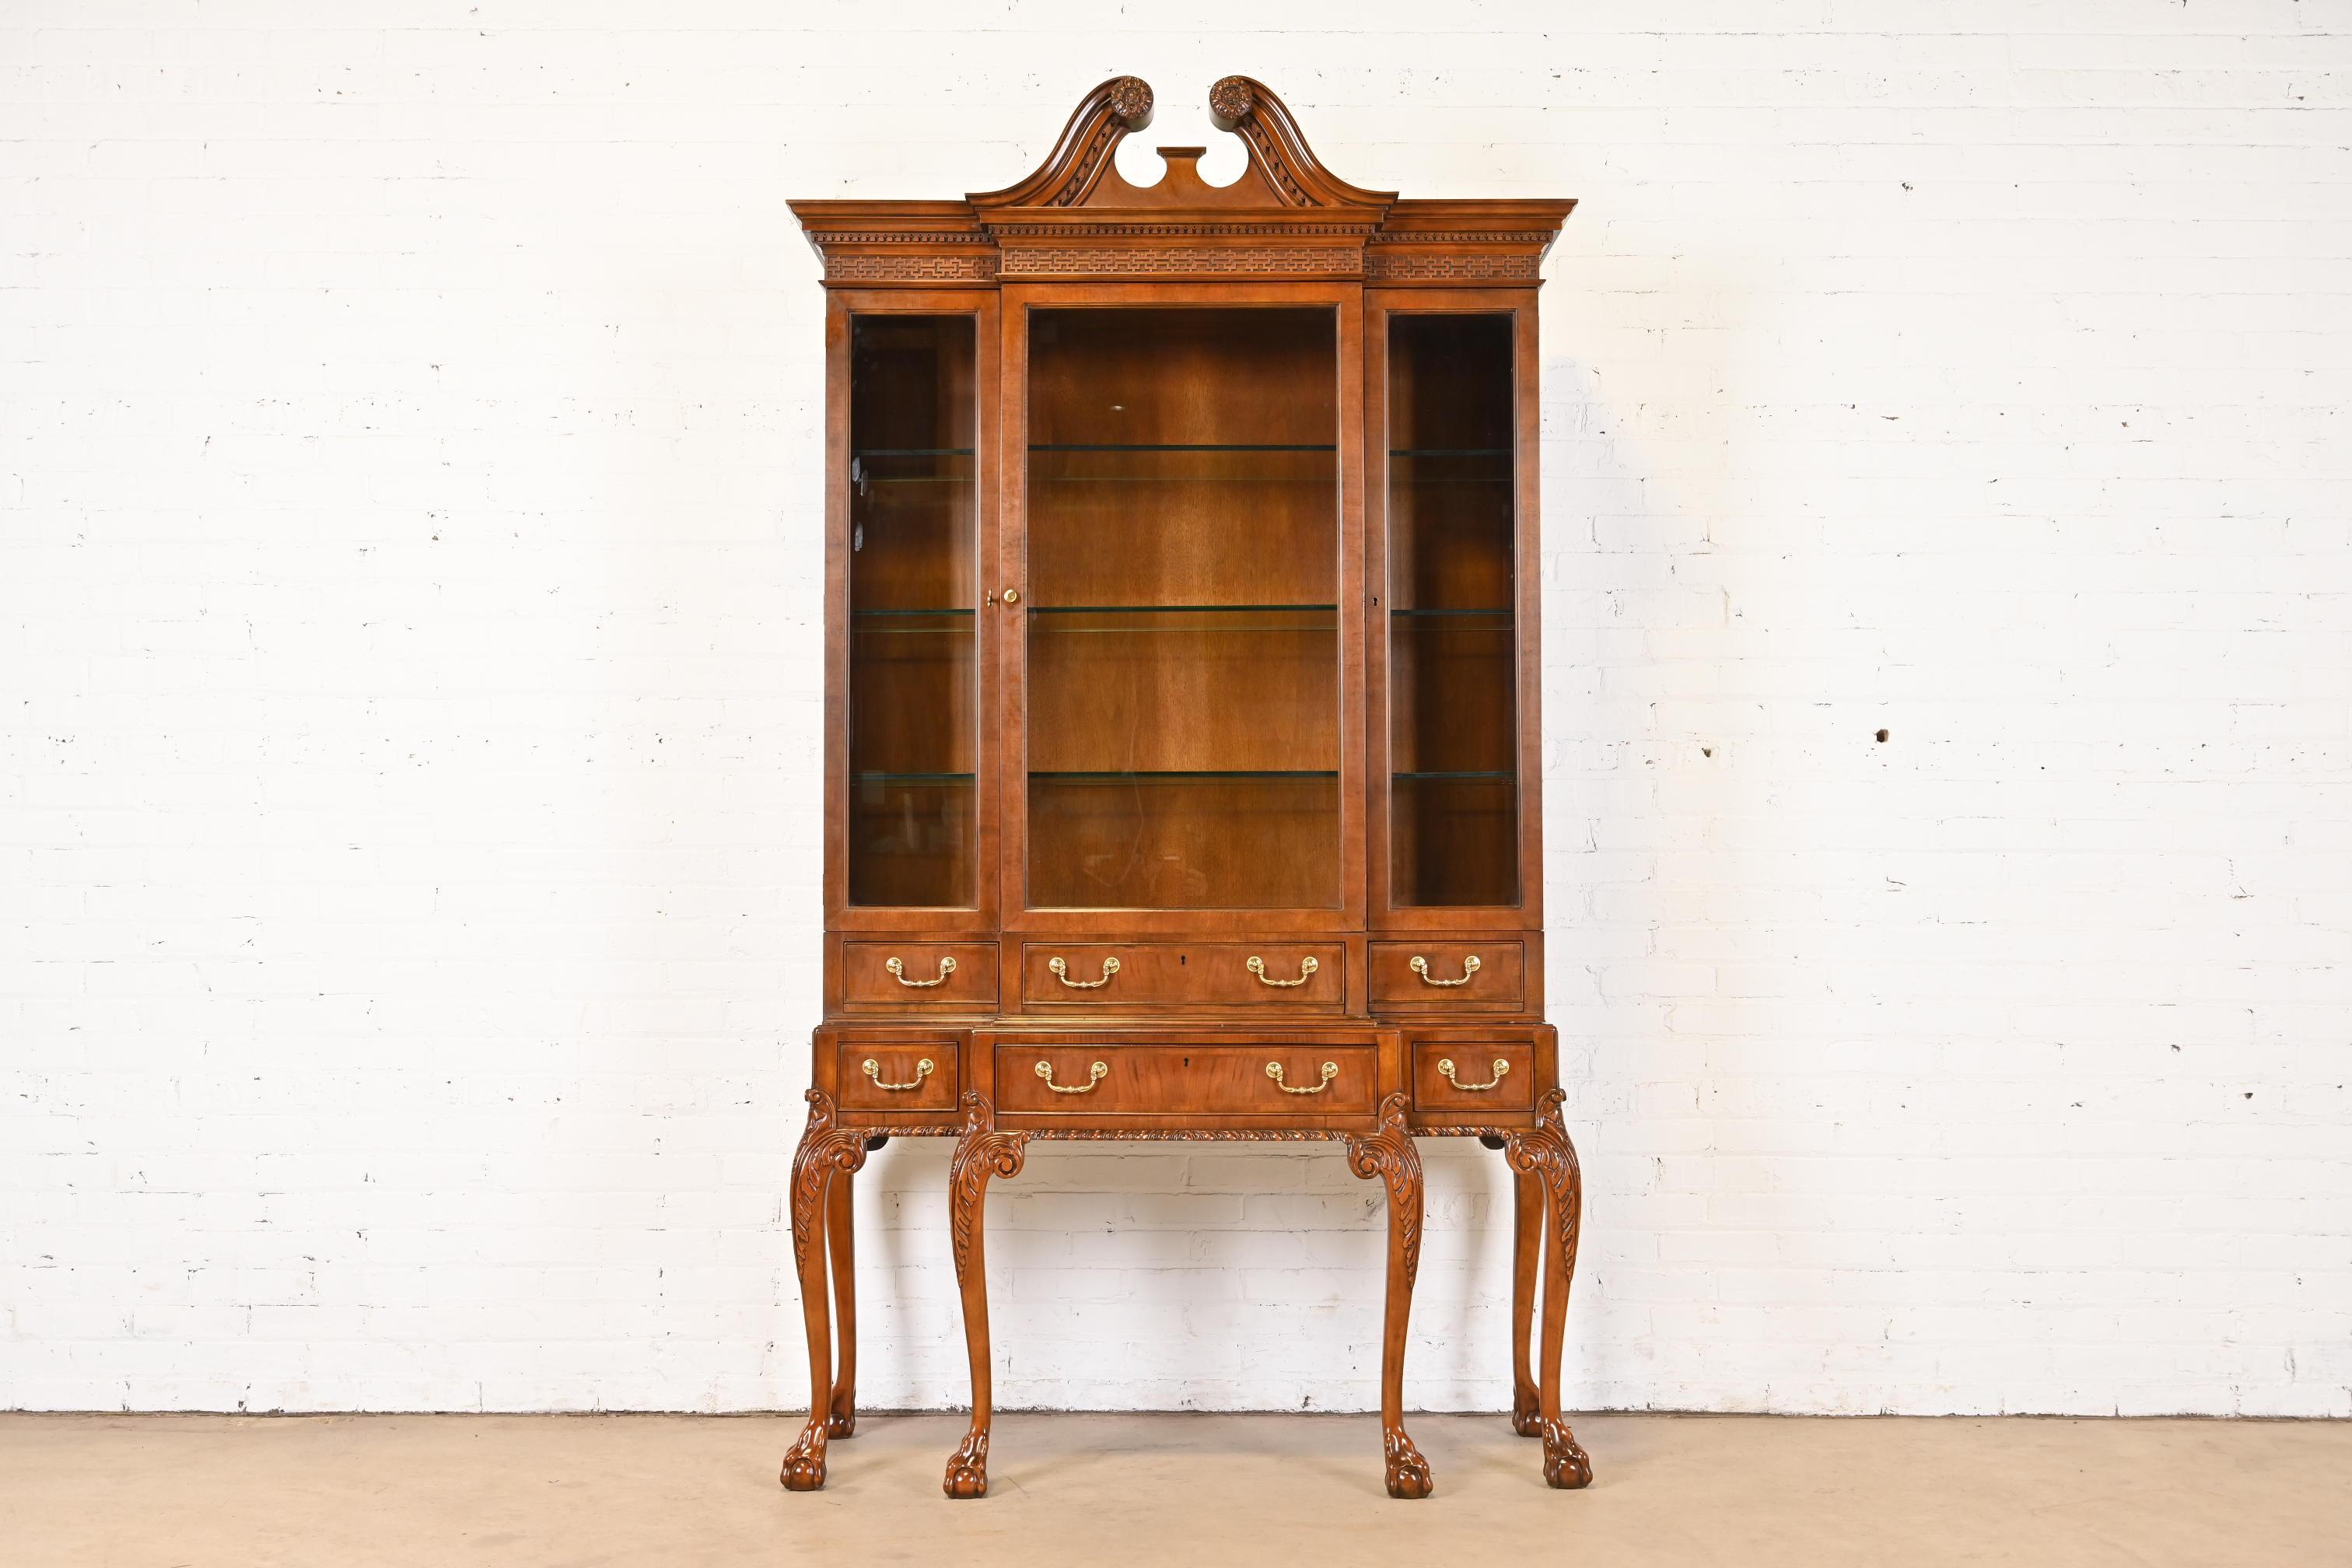 An exceptional Chippendale or Georgian style lighted breakfront china display cabinet or bookcase

From the exclusive 